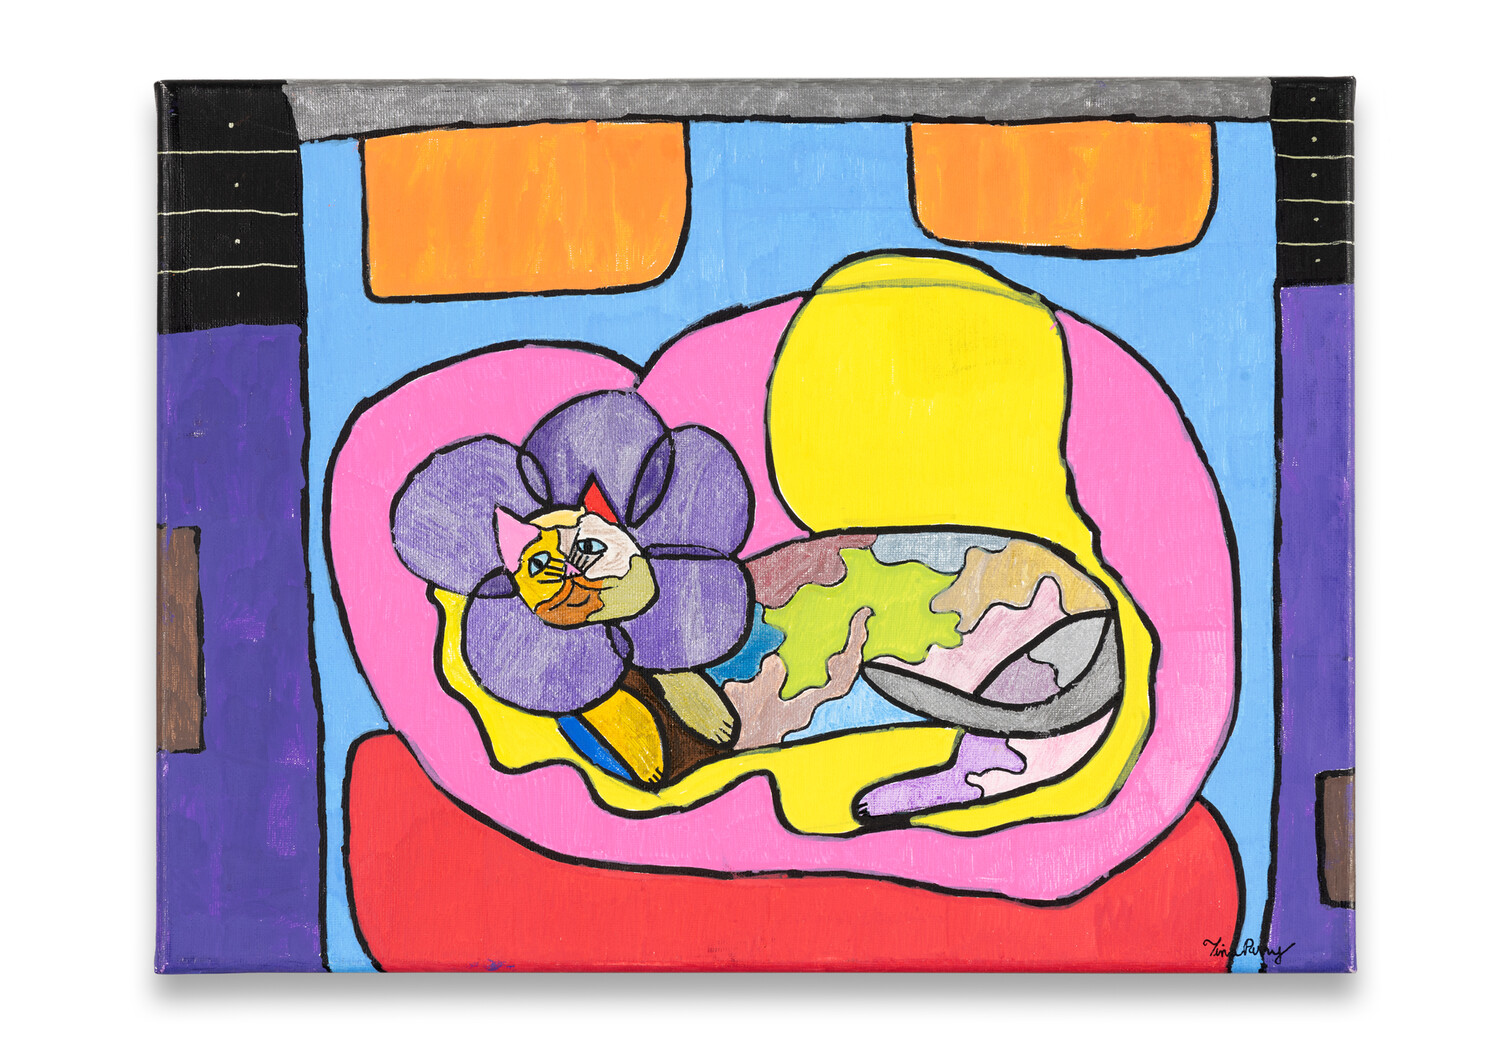 photo of The Healing Kitty, Kitty on the Mind, a brightly colored painting depicting a smiling cat